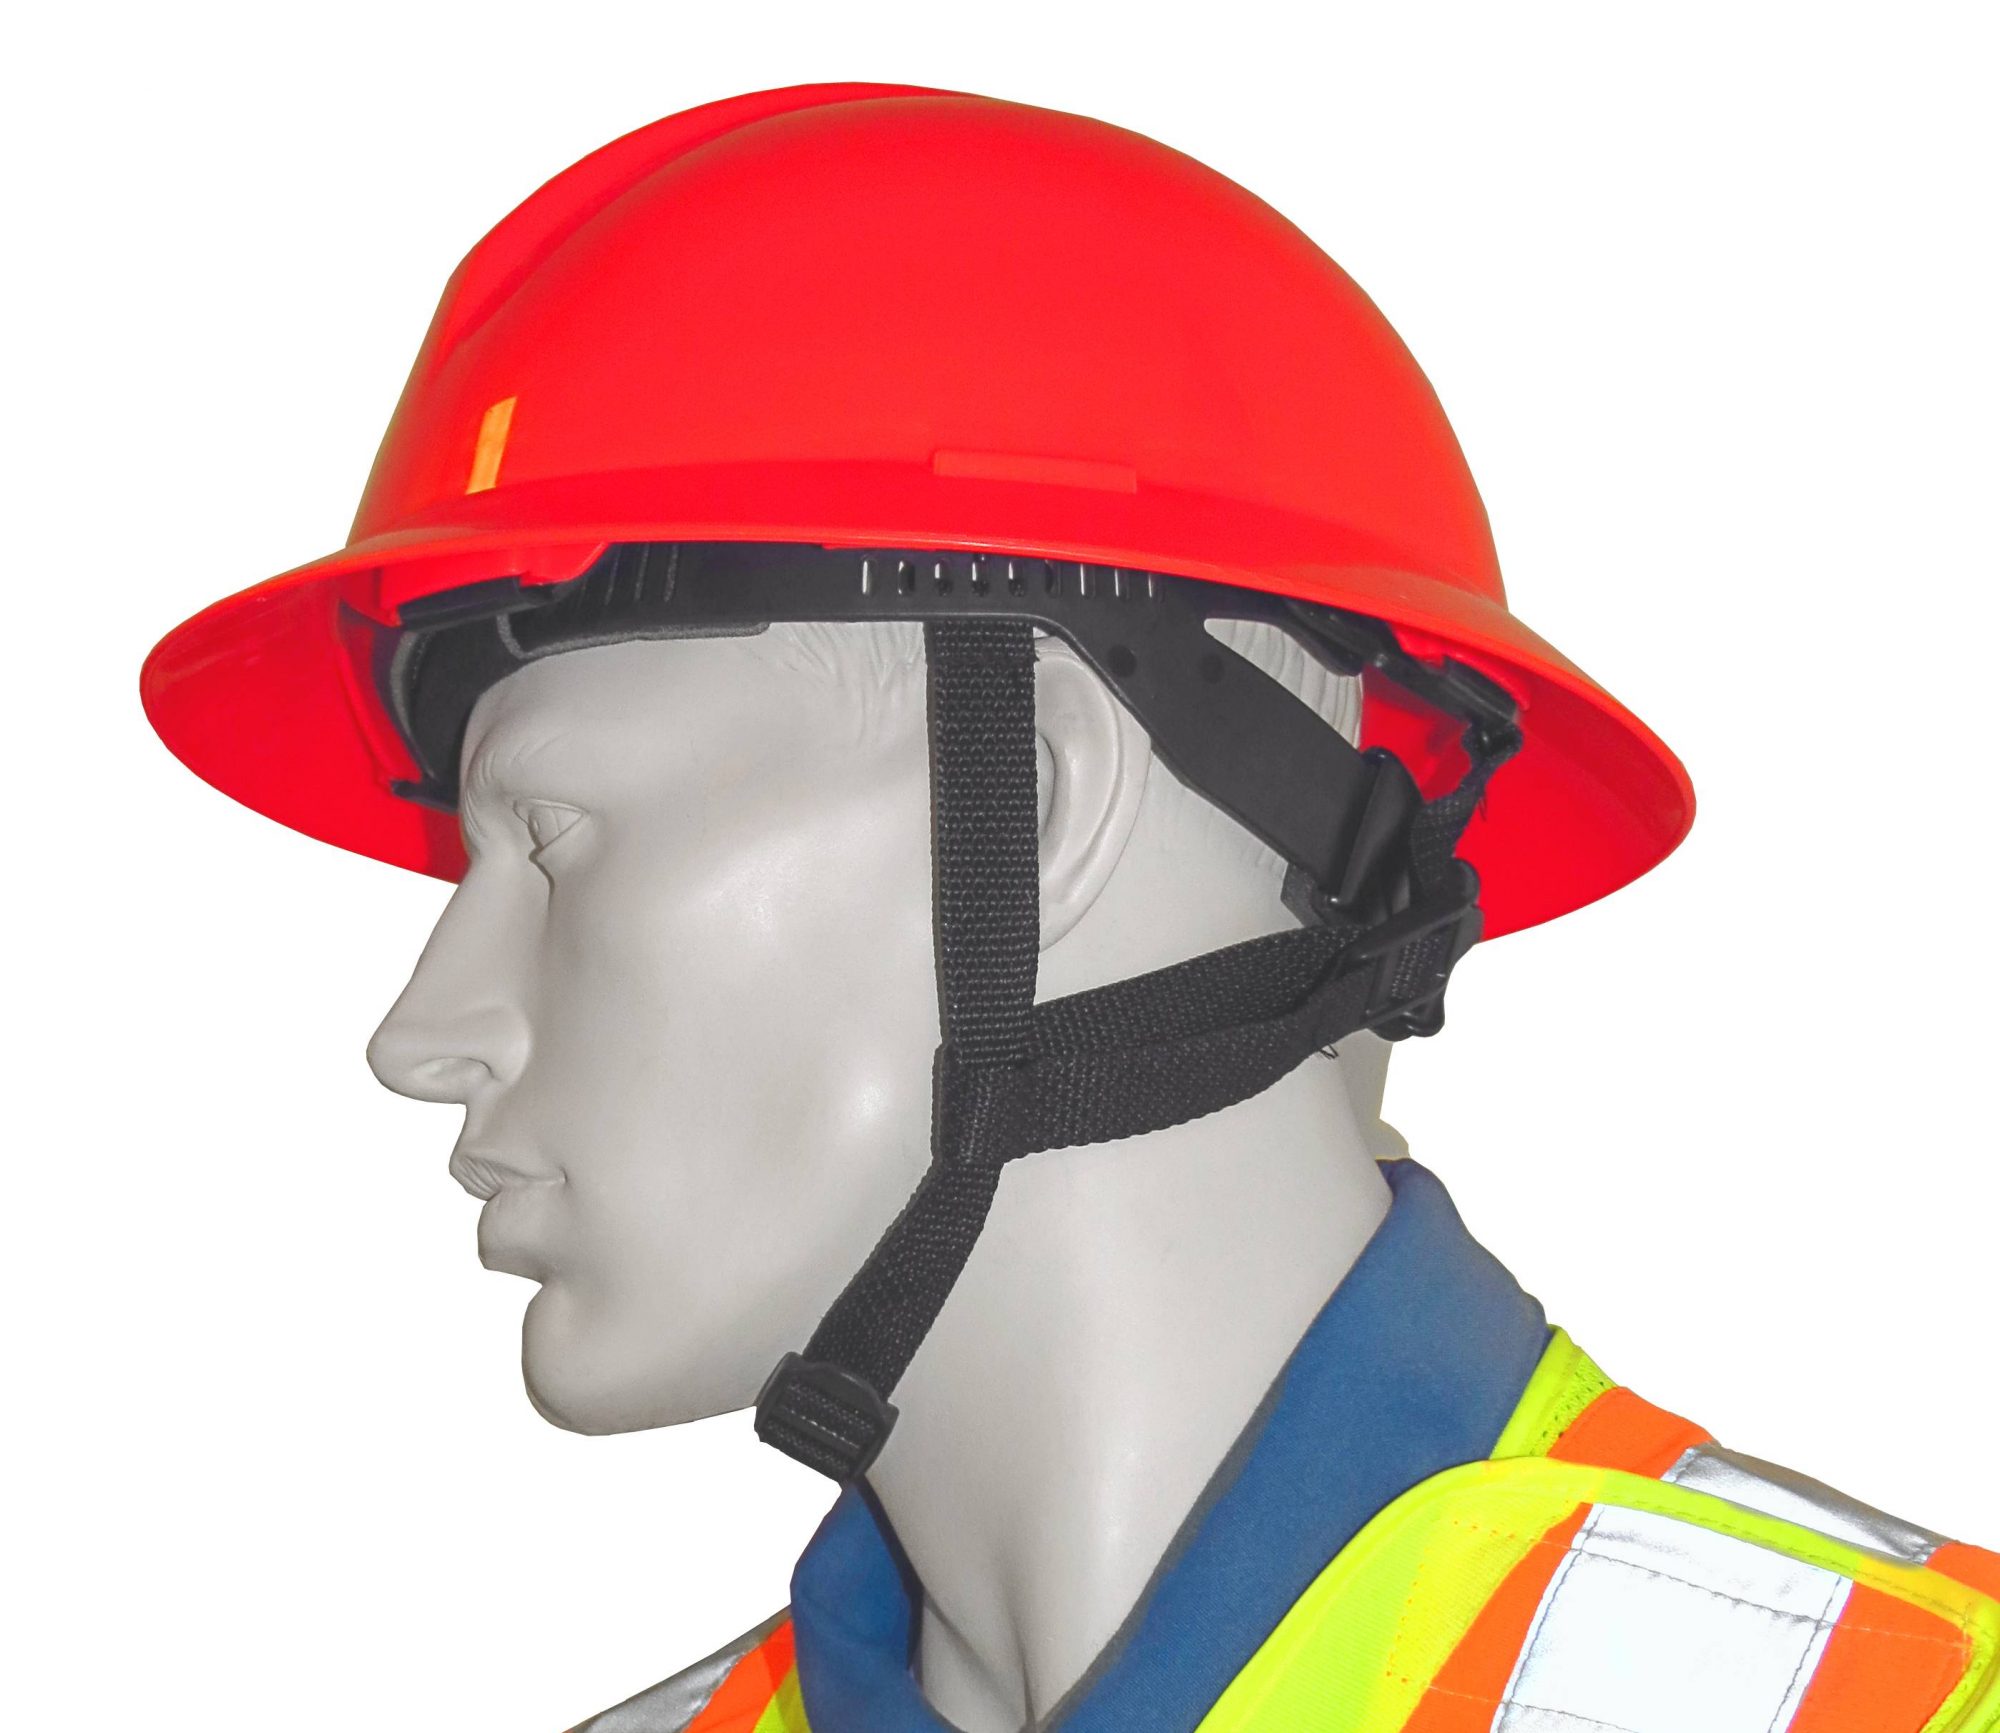 The safety helmet is an indispensable piece of protective equipment.